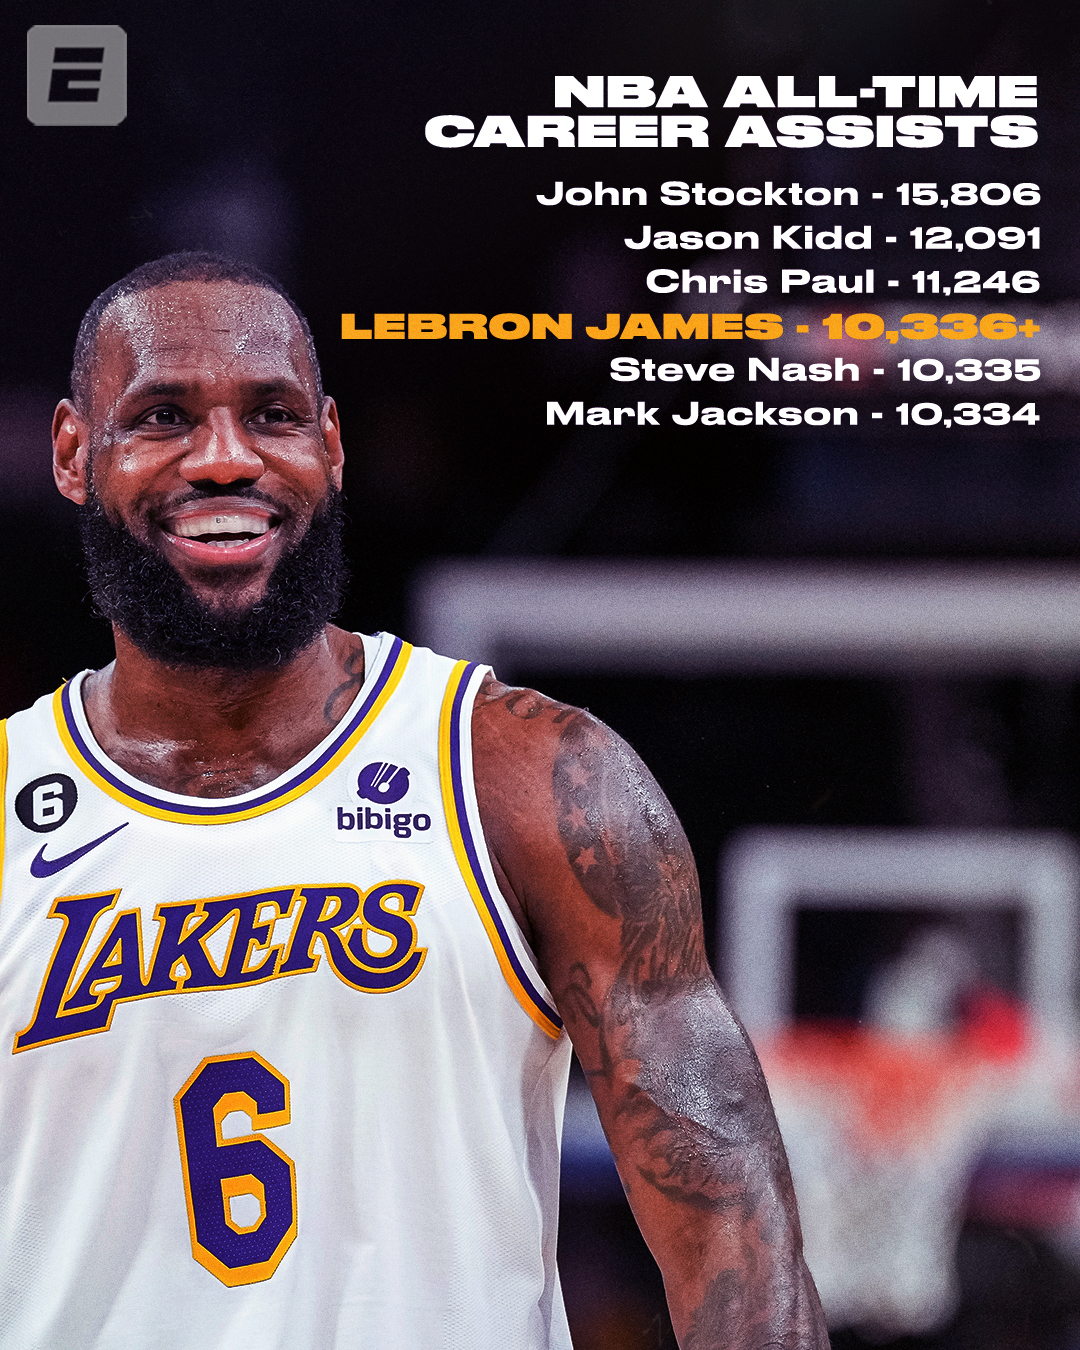 ingen udvikling mus SportsCenter on Twitter: "Another milestone for the King 👑 LeBron passes  Mark Jackson and Steve Nash for fourth on the NBA all-time assist list 📈  https://t.co/rMjH5AS488" / Twitter